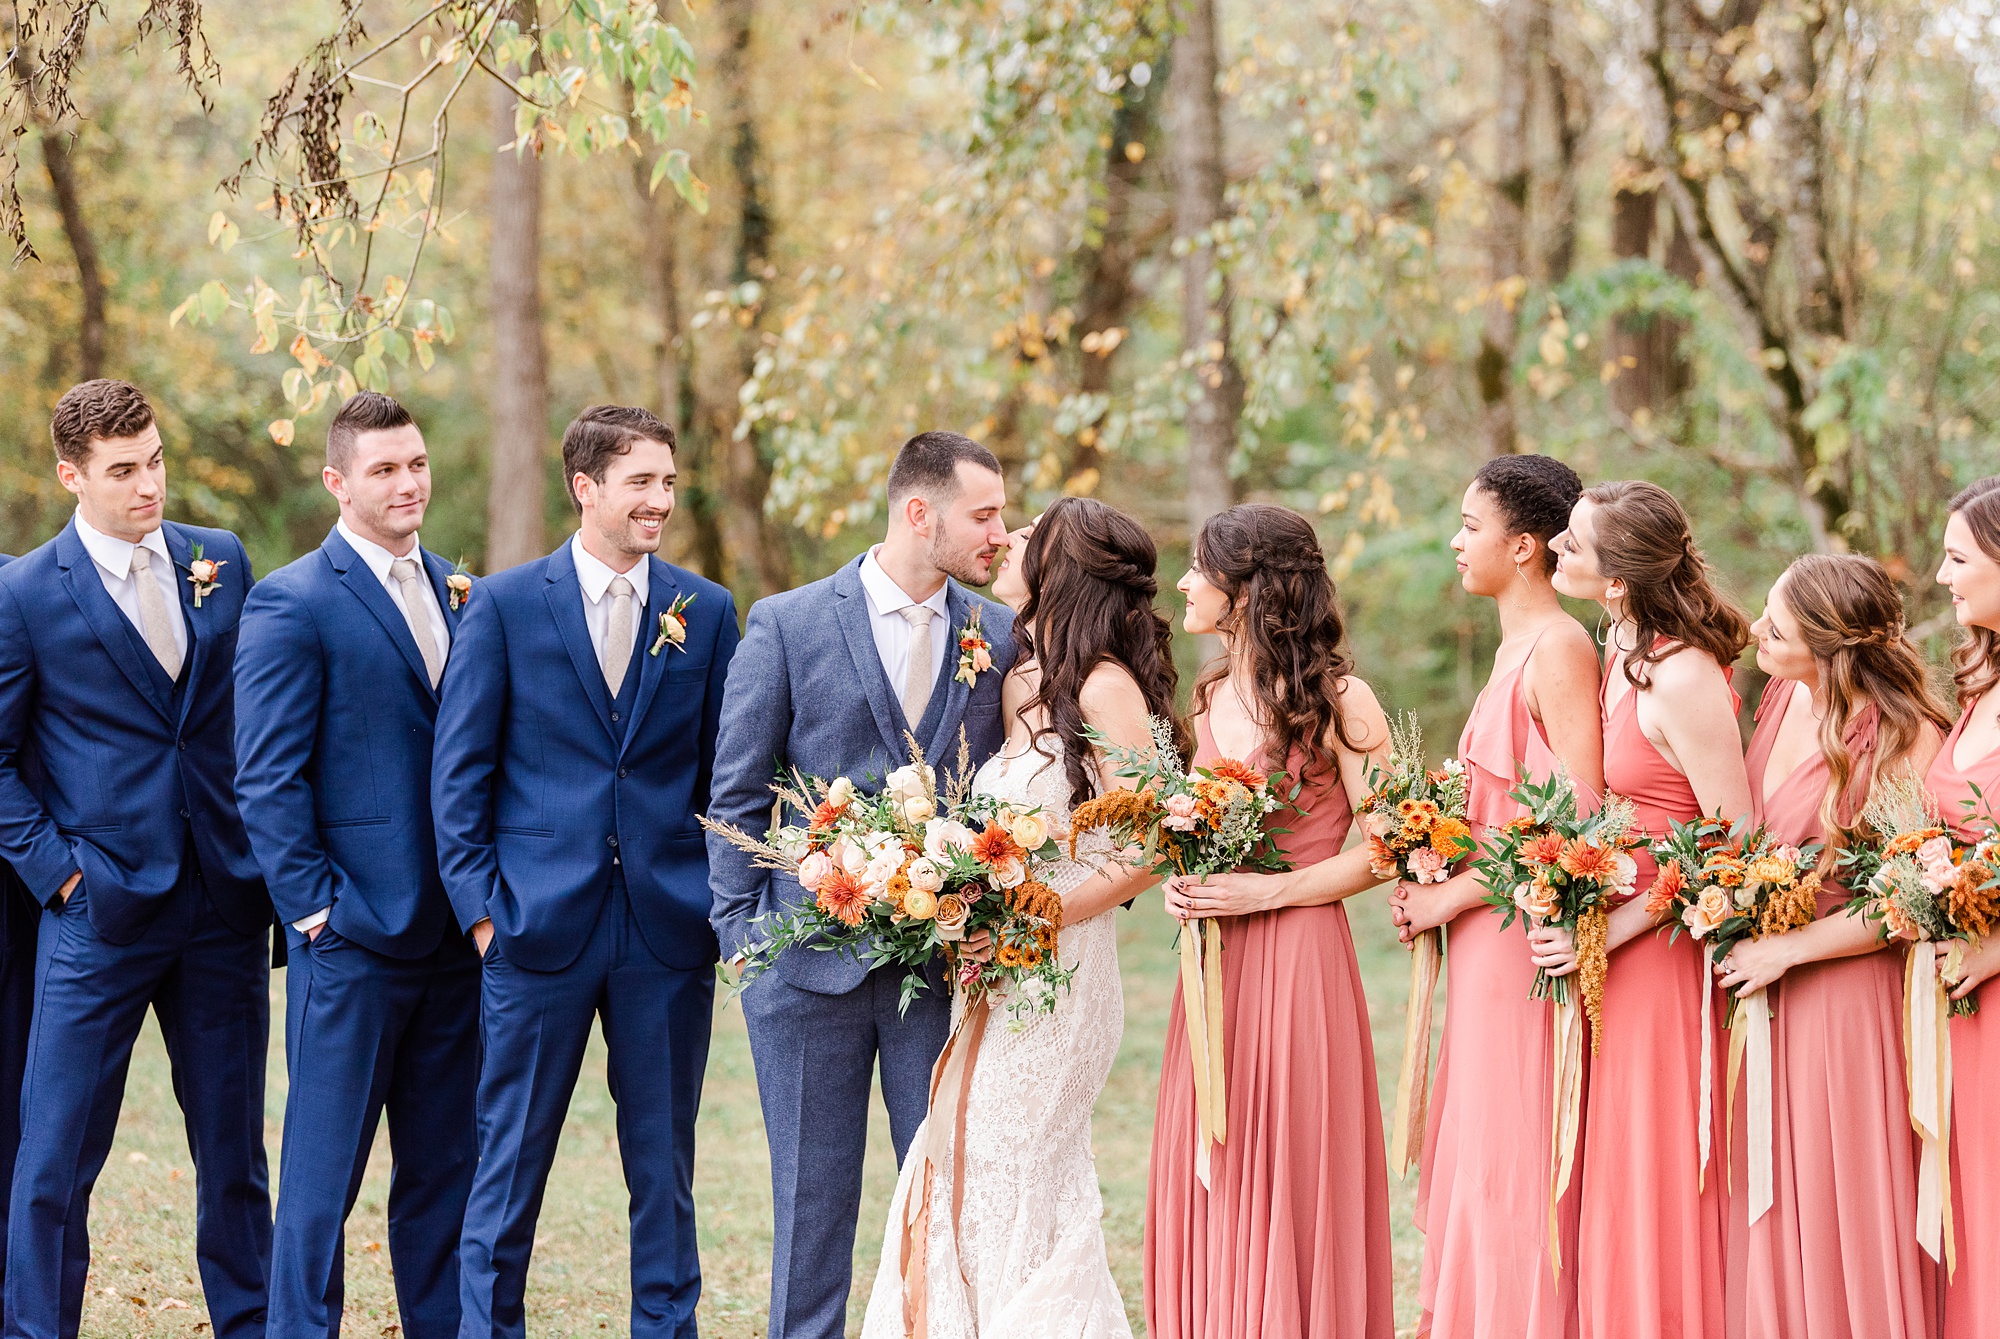 bride and groom kiss while bridesmaids and groomsmen watch